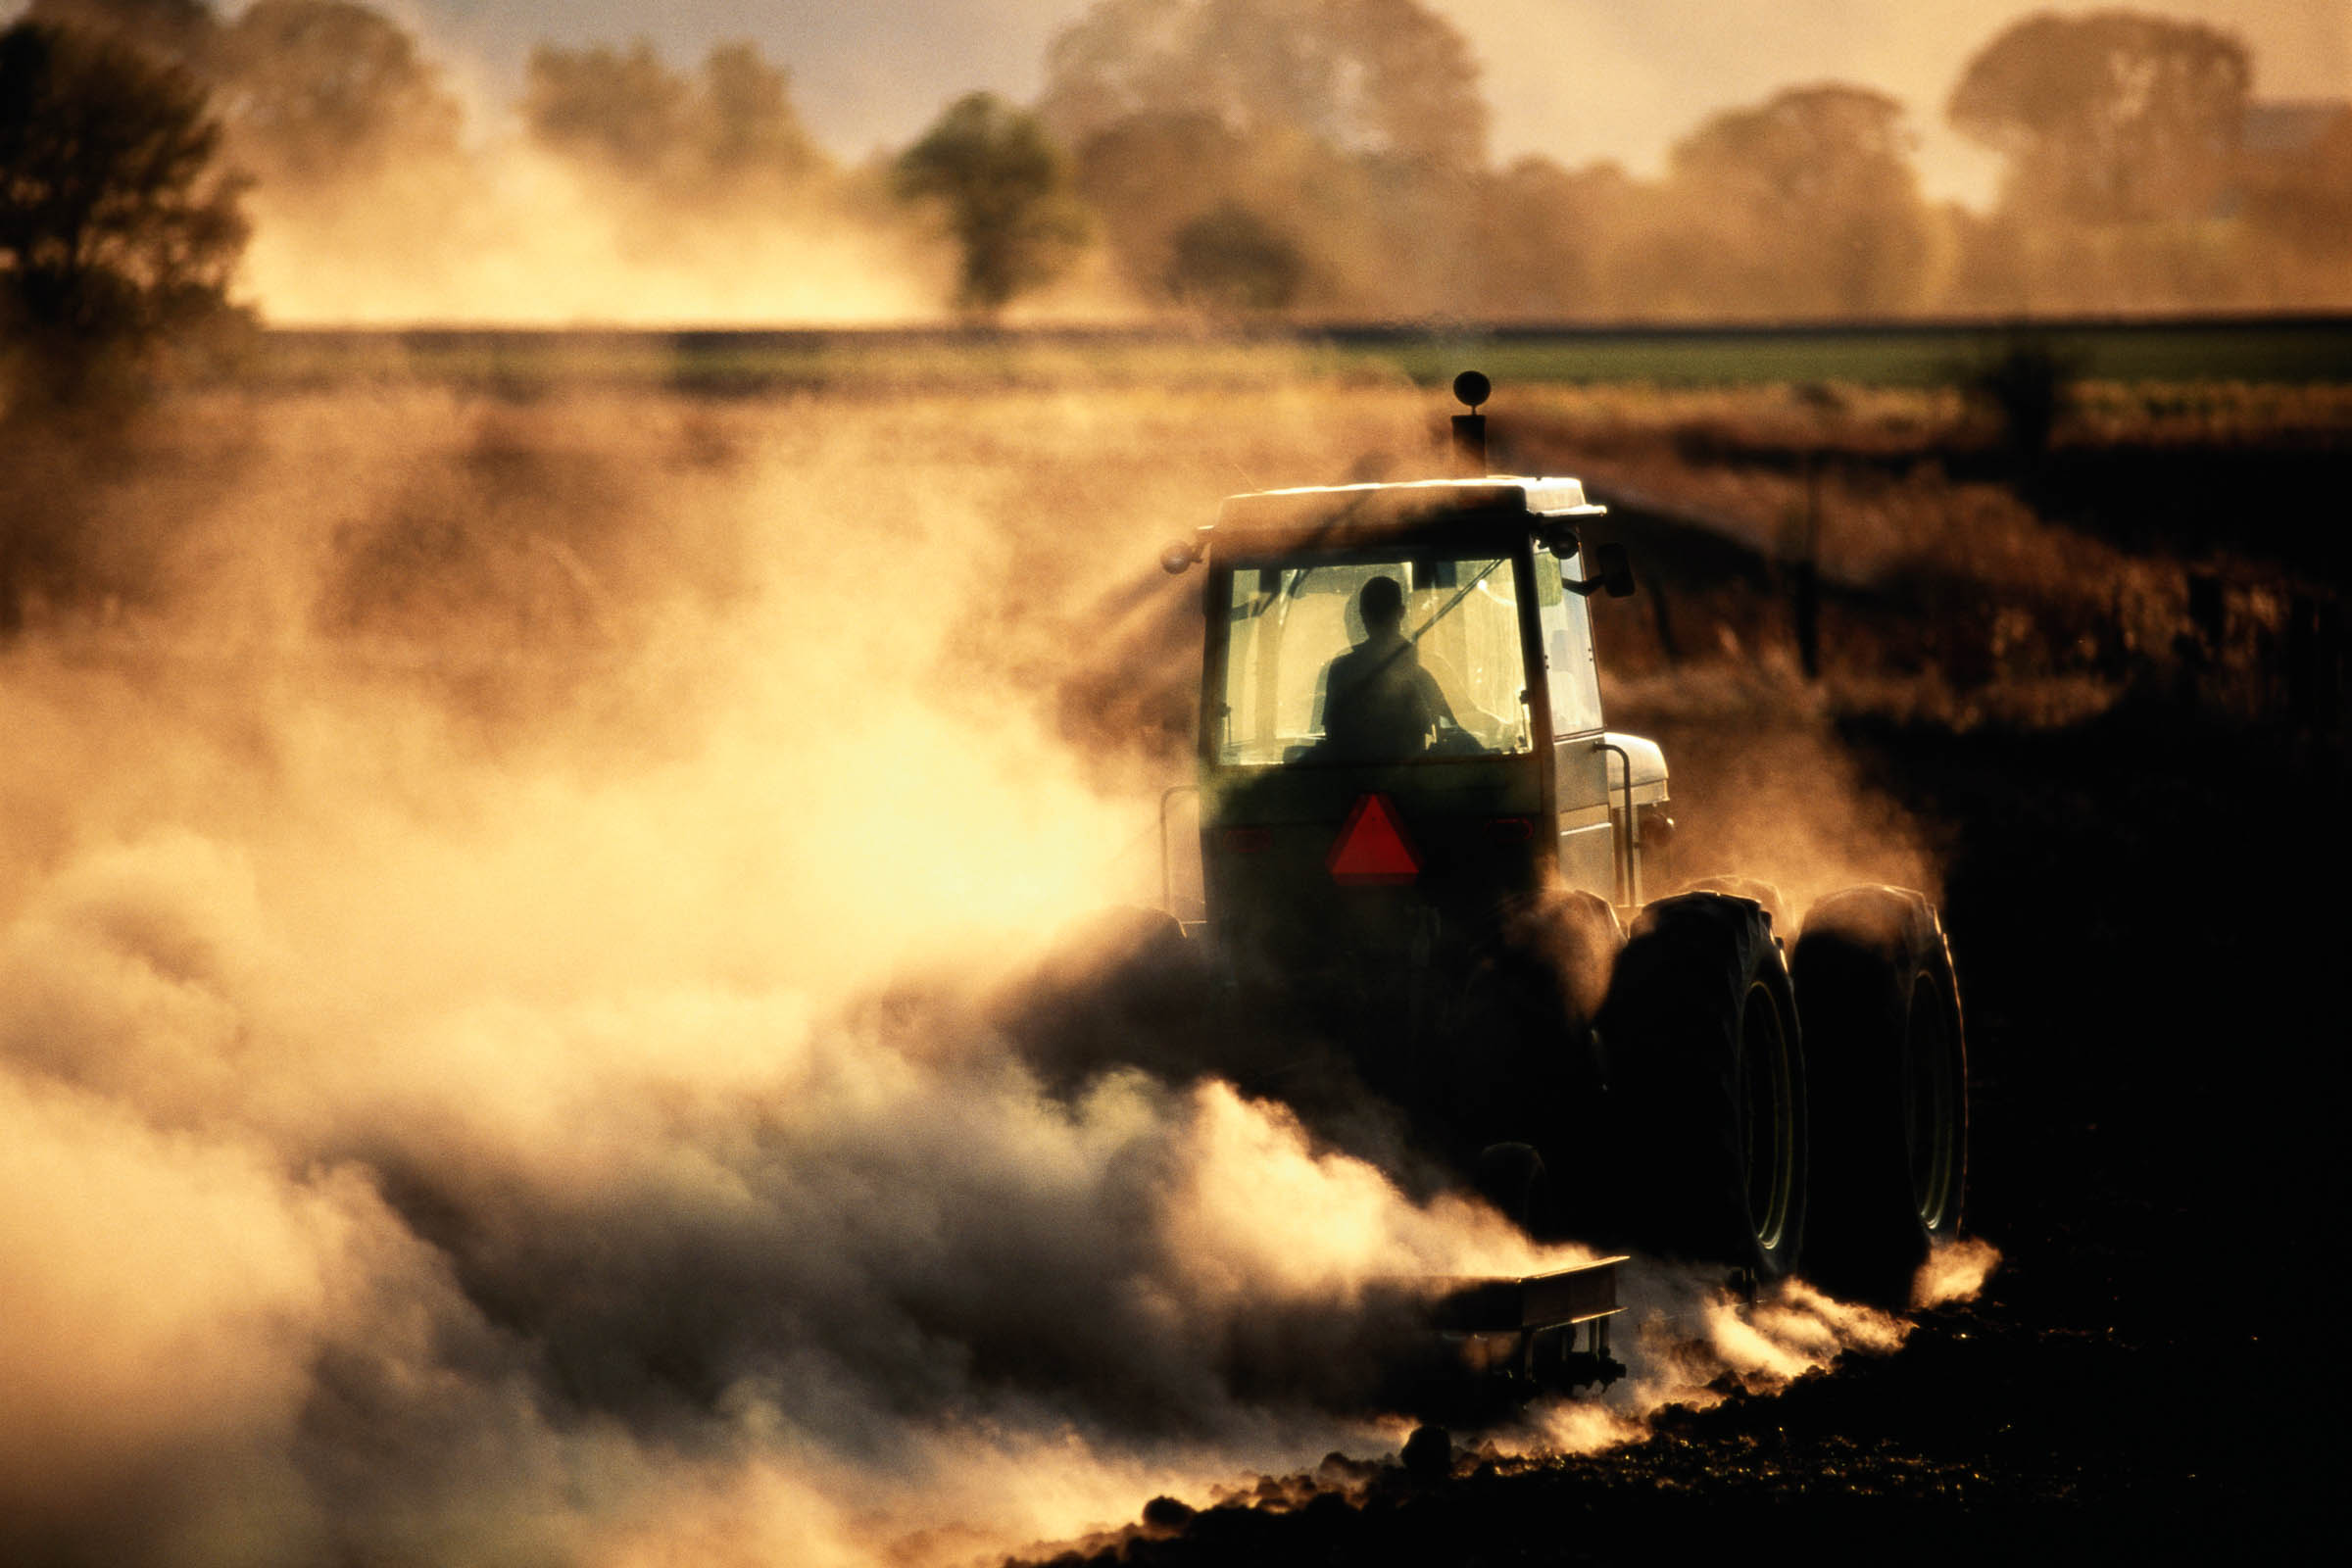 A hazy view of a tractor plowing a field surrounded by a dust cloud